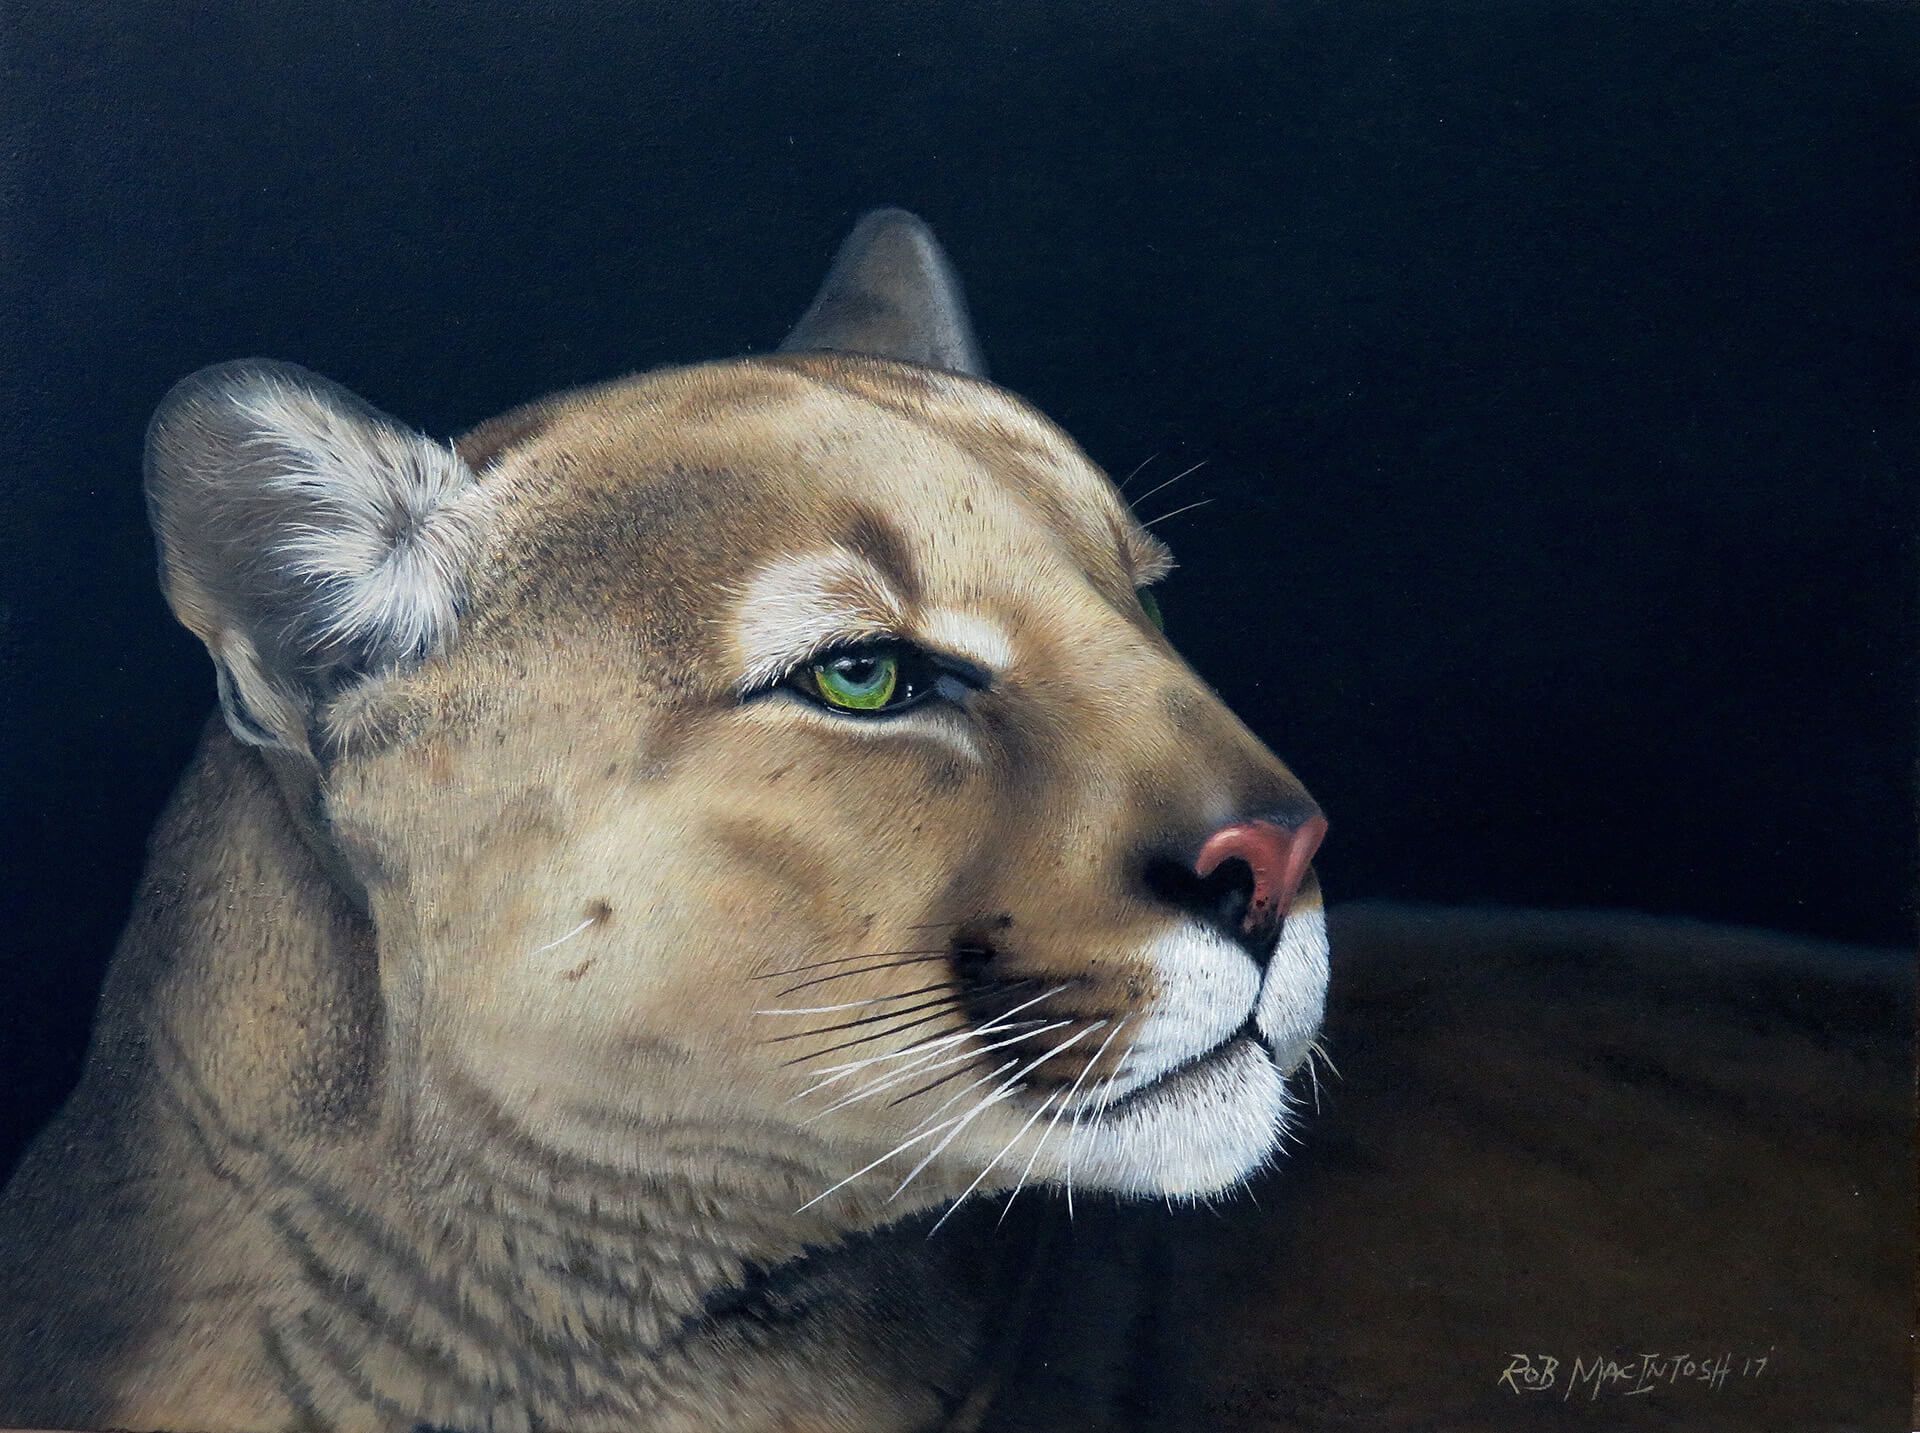 Photorealistic painting of a side portrait of a mountain lion